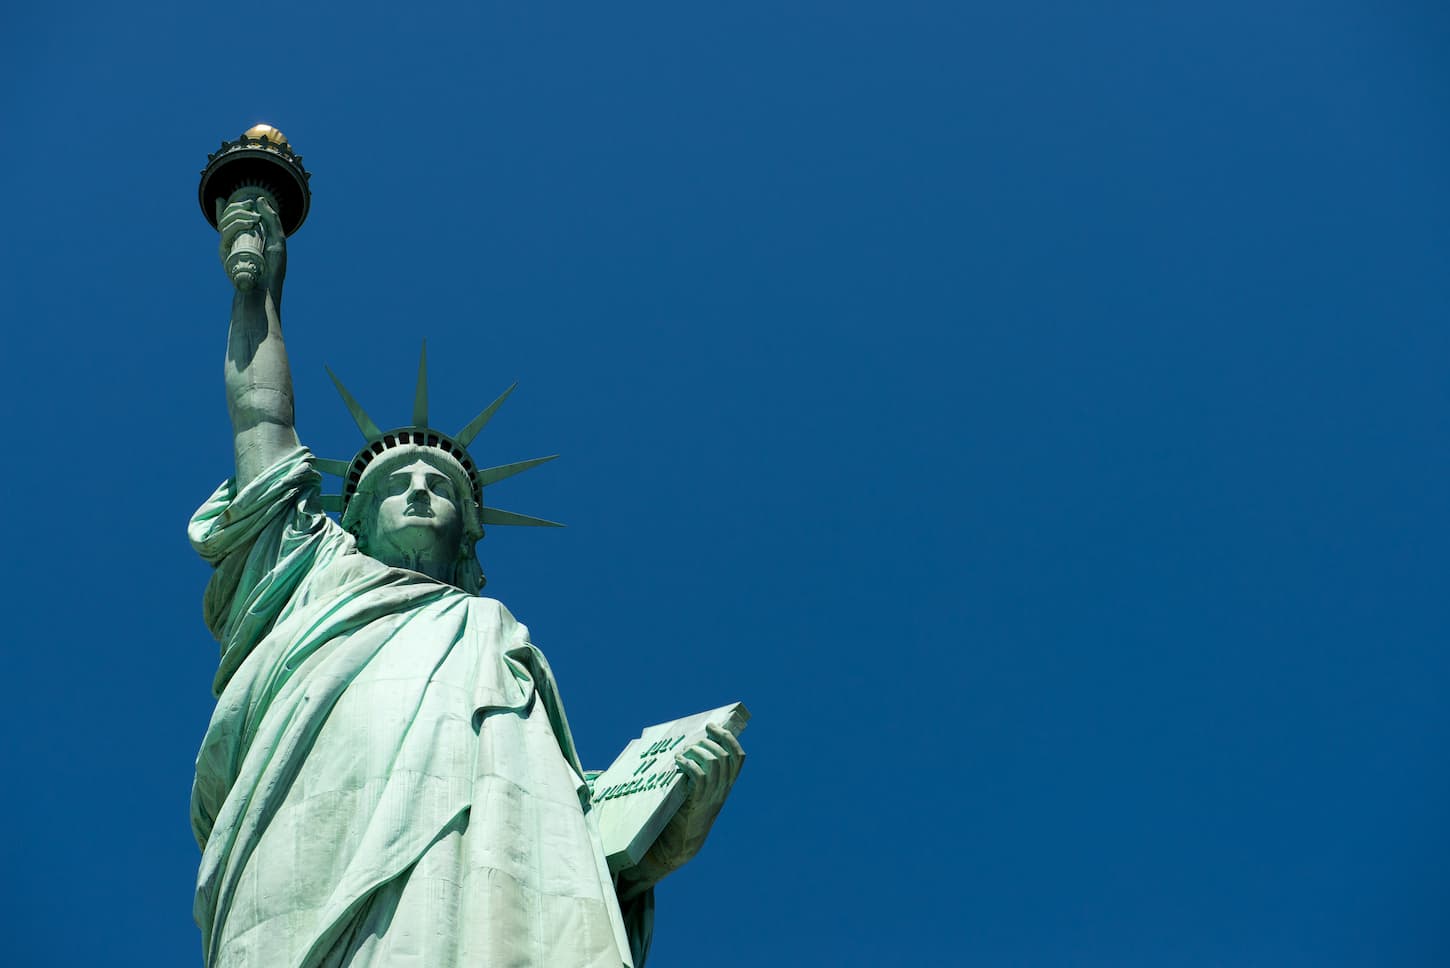 An image of The Statue of Liberty in New York City.